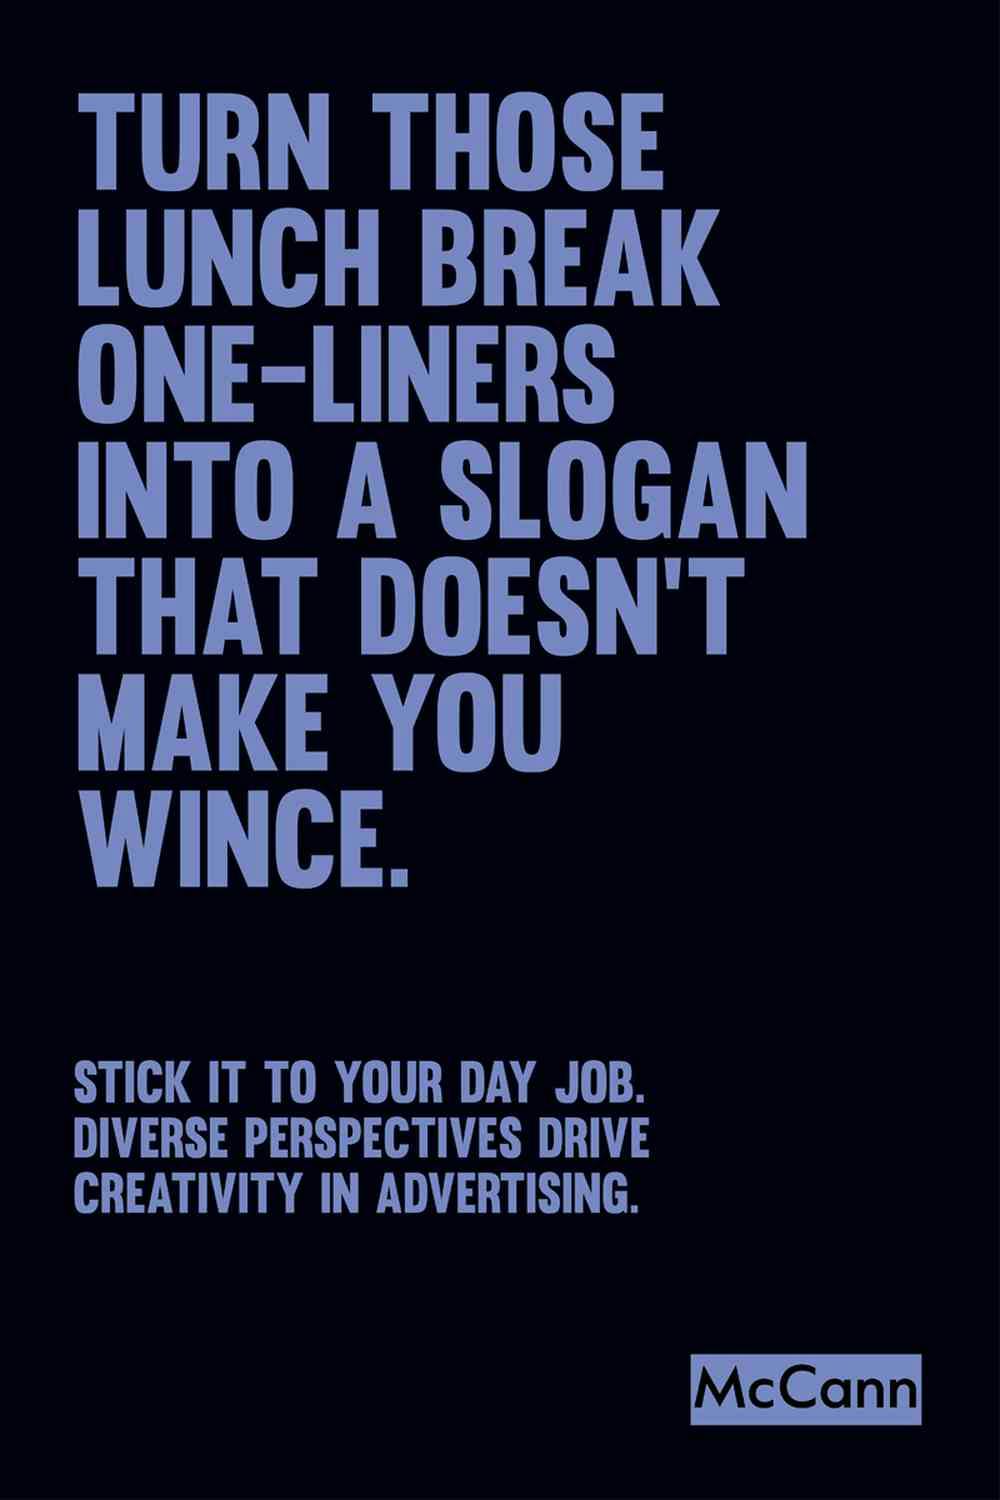 Black poster with large blue upper-case text which reads turn those lunchbreak one-liners into a slogan that doesn’t make you wince. Smaller text underneath reads stick it to your day job. Diverse perspectives drive creativity in advertising. The McCann logo appears at the bottom.